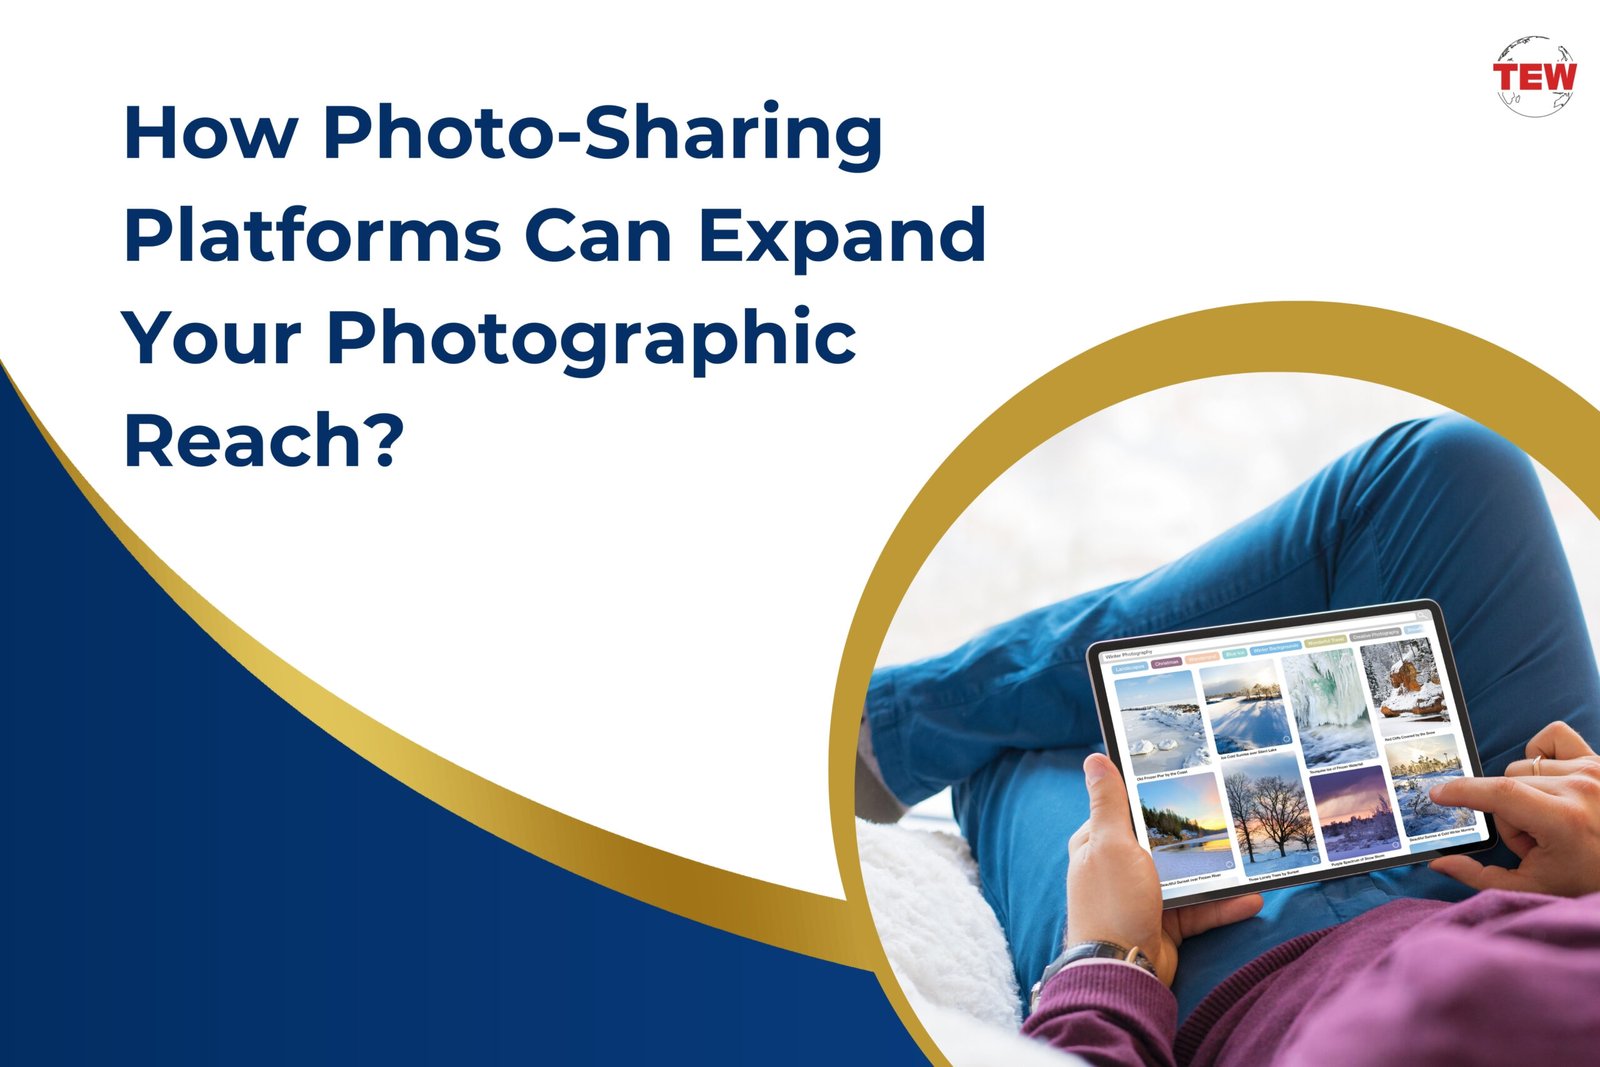 How Photo-Sharing Platforms Can Expand Your Photographic Reach?